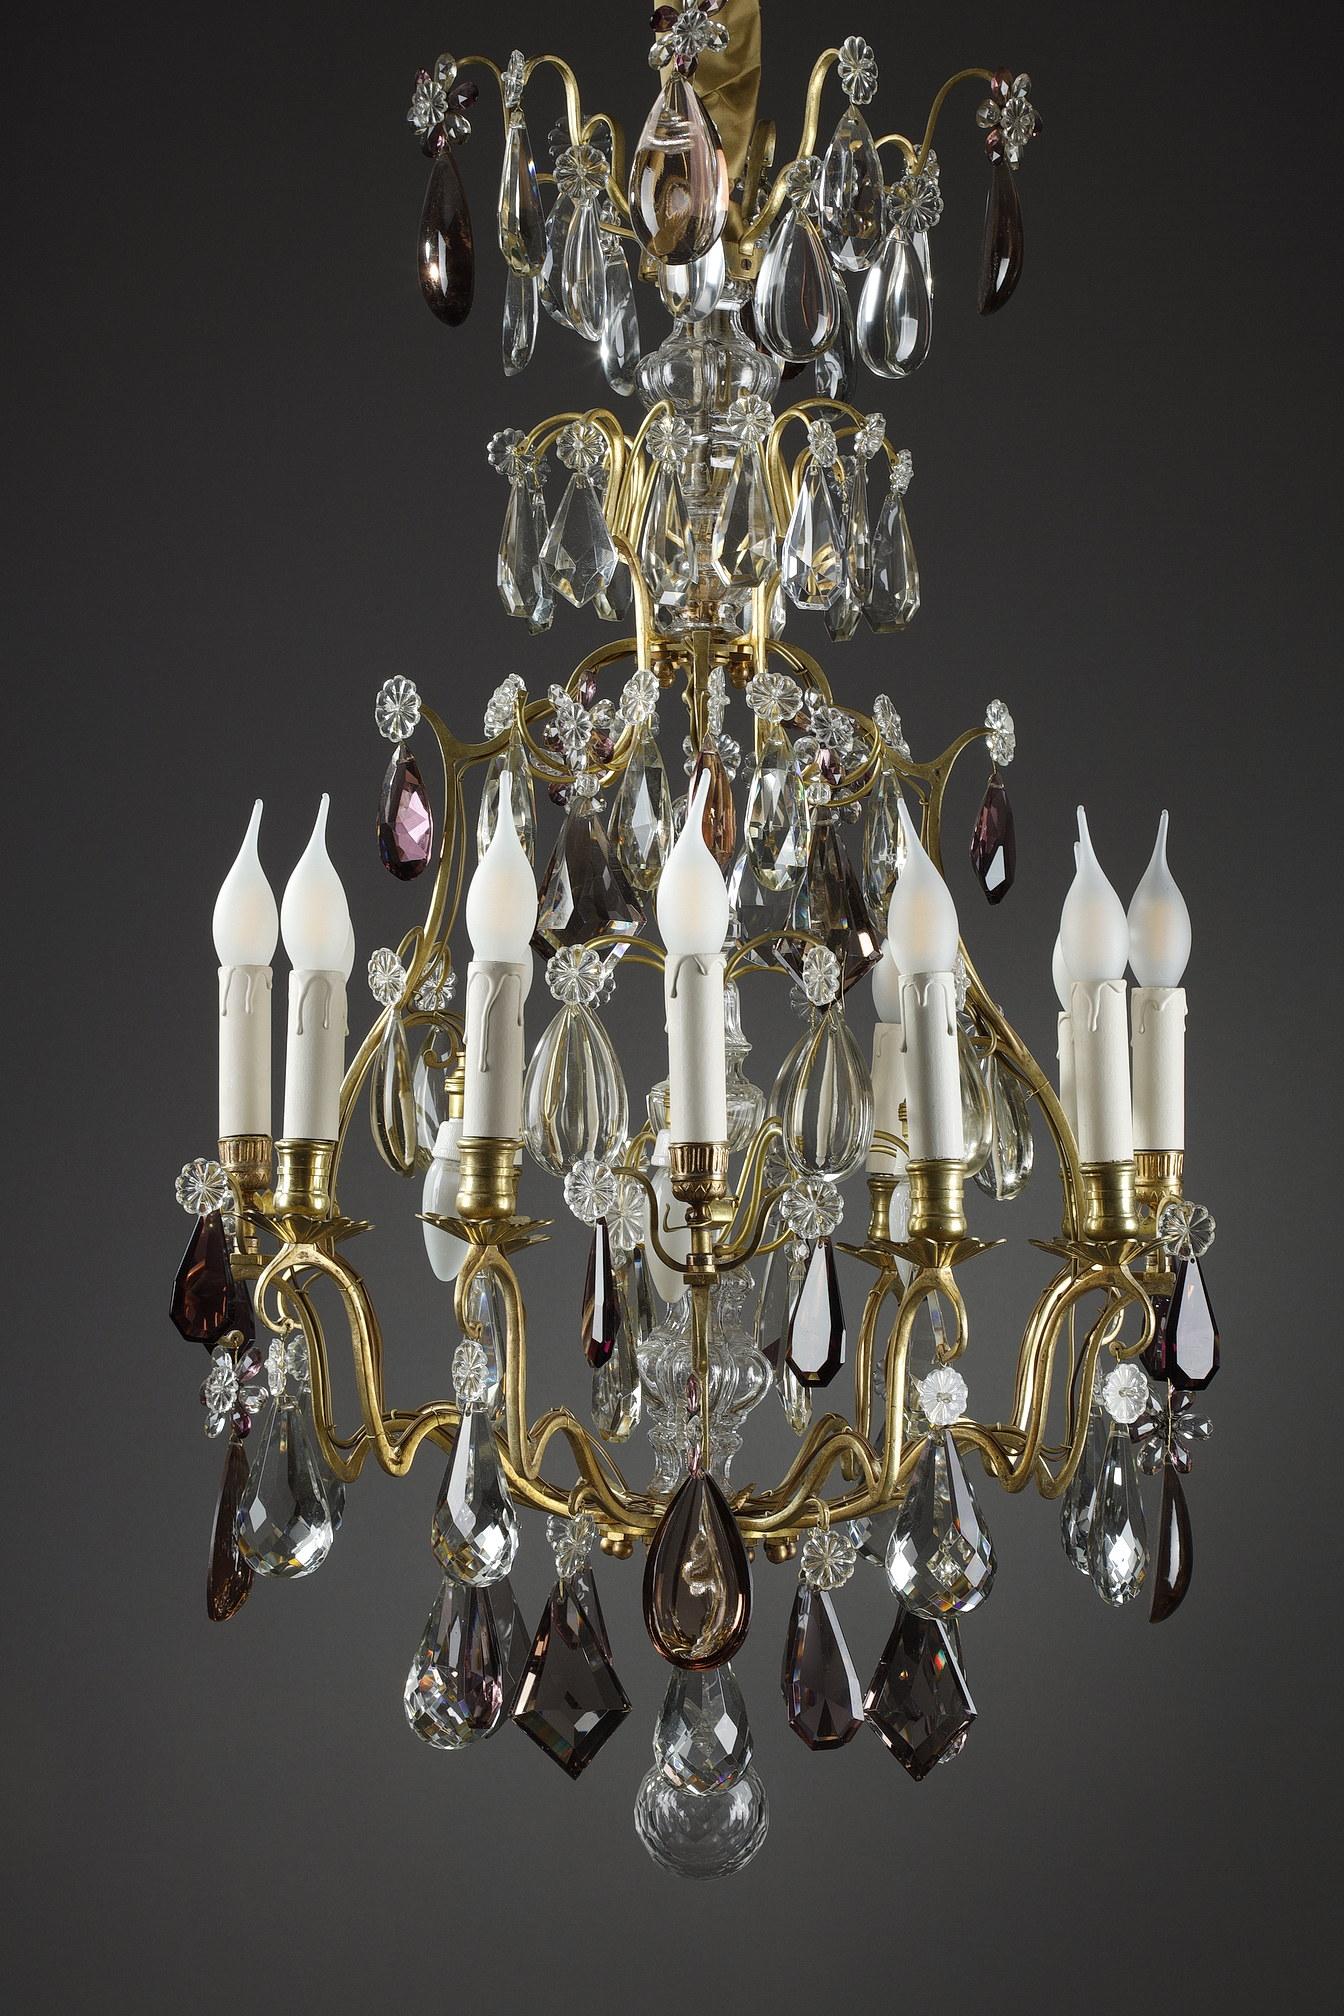 A large sixteen lights chandelier in white and amethyst crystal. It has twelve arms of lights at the edge and four inverted lights in the central part. This chandelier is composed of six rows of cut pendants, rosettes and half-pears with a